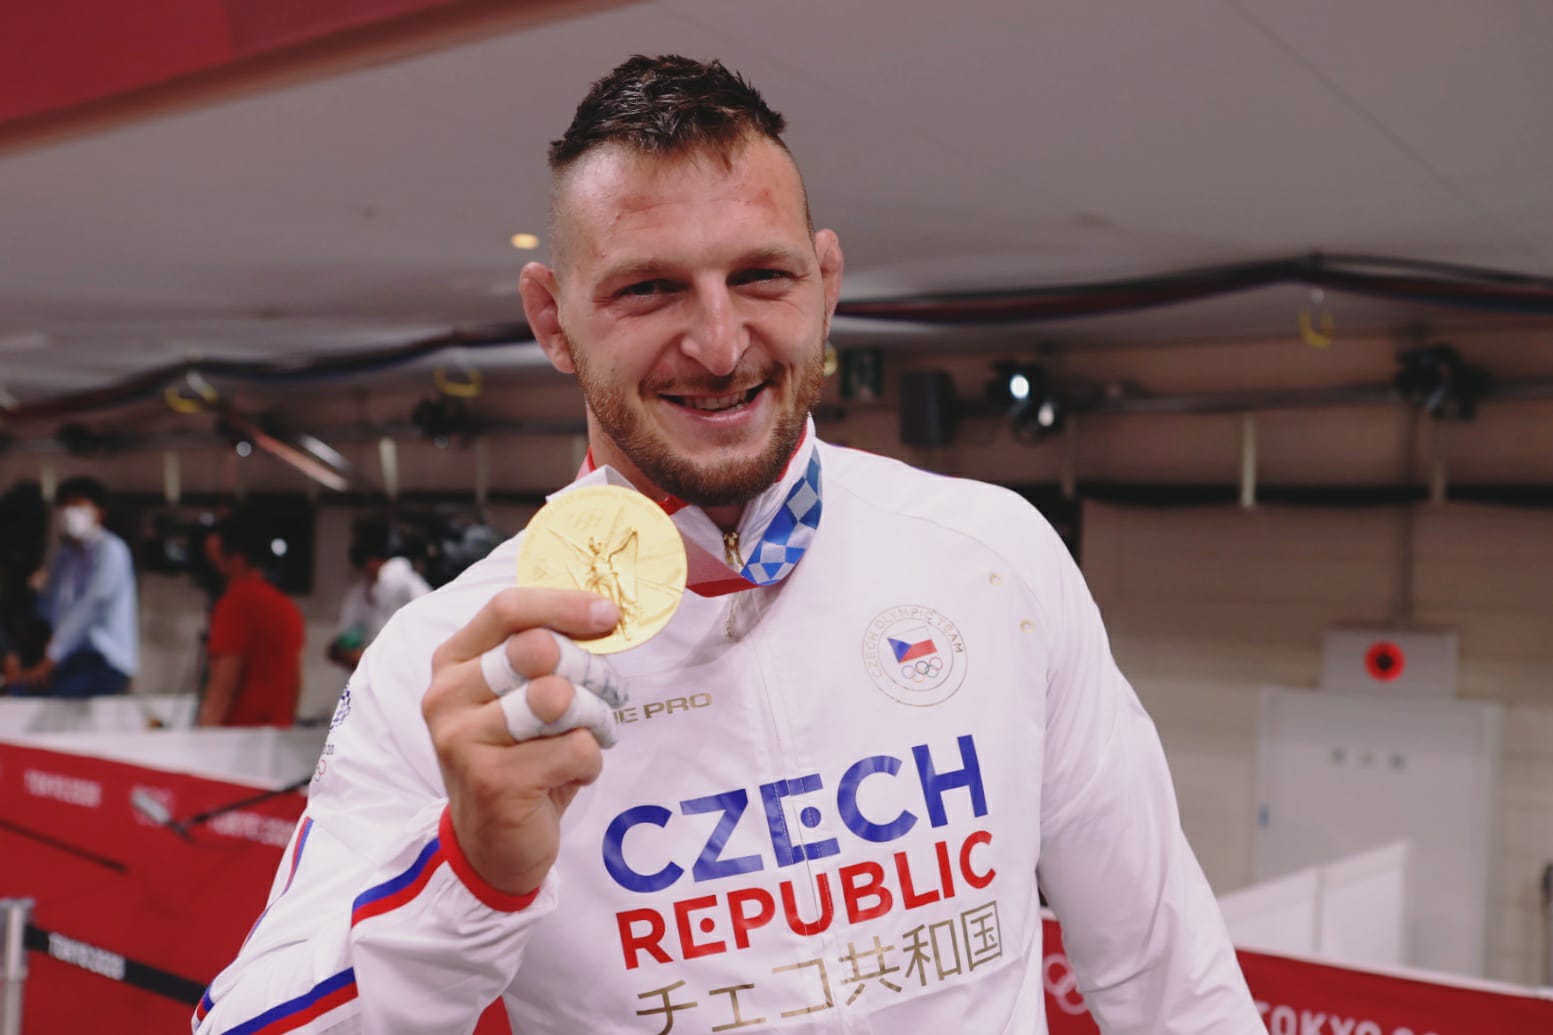 KRPALEK CONQUERS TWO CATEGORIES AND REPEATS OLYMPIC SUCCESS IN TOKYO